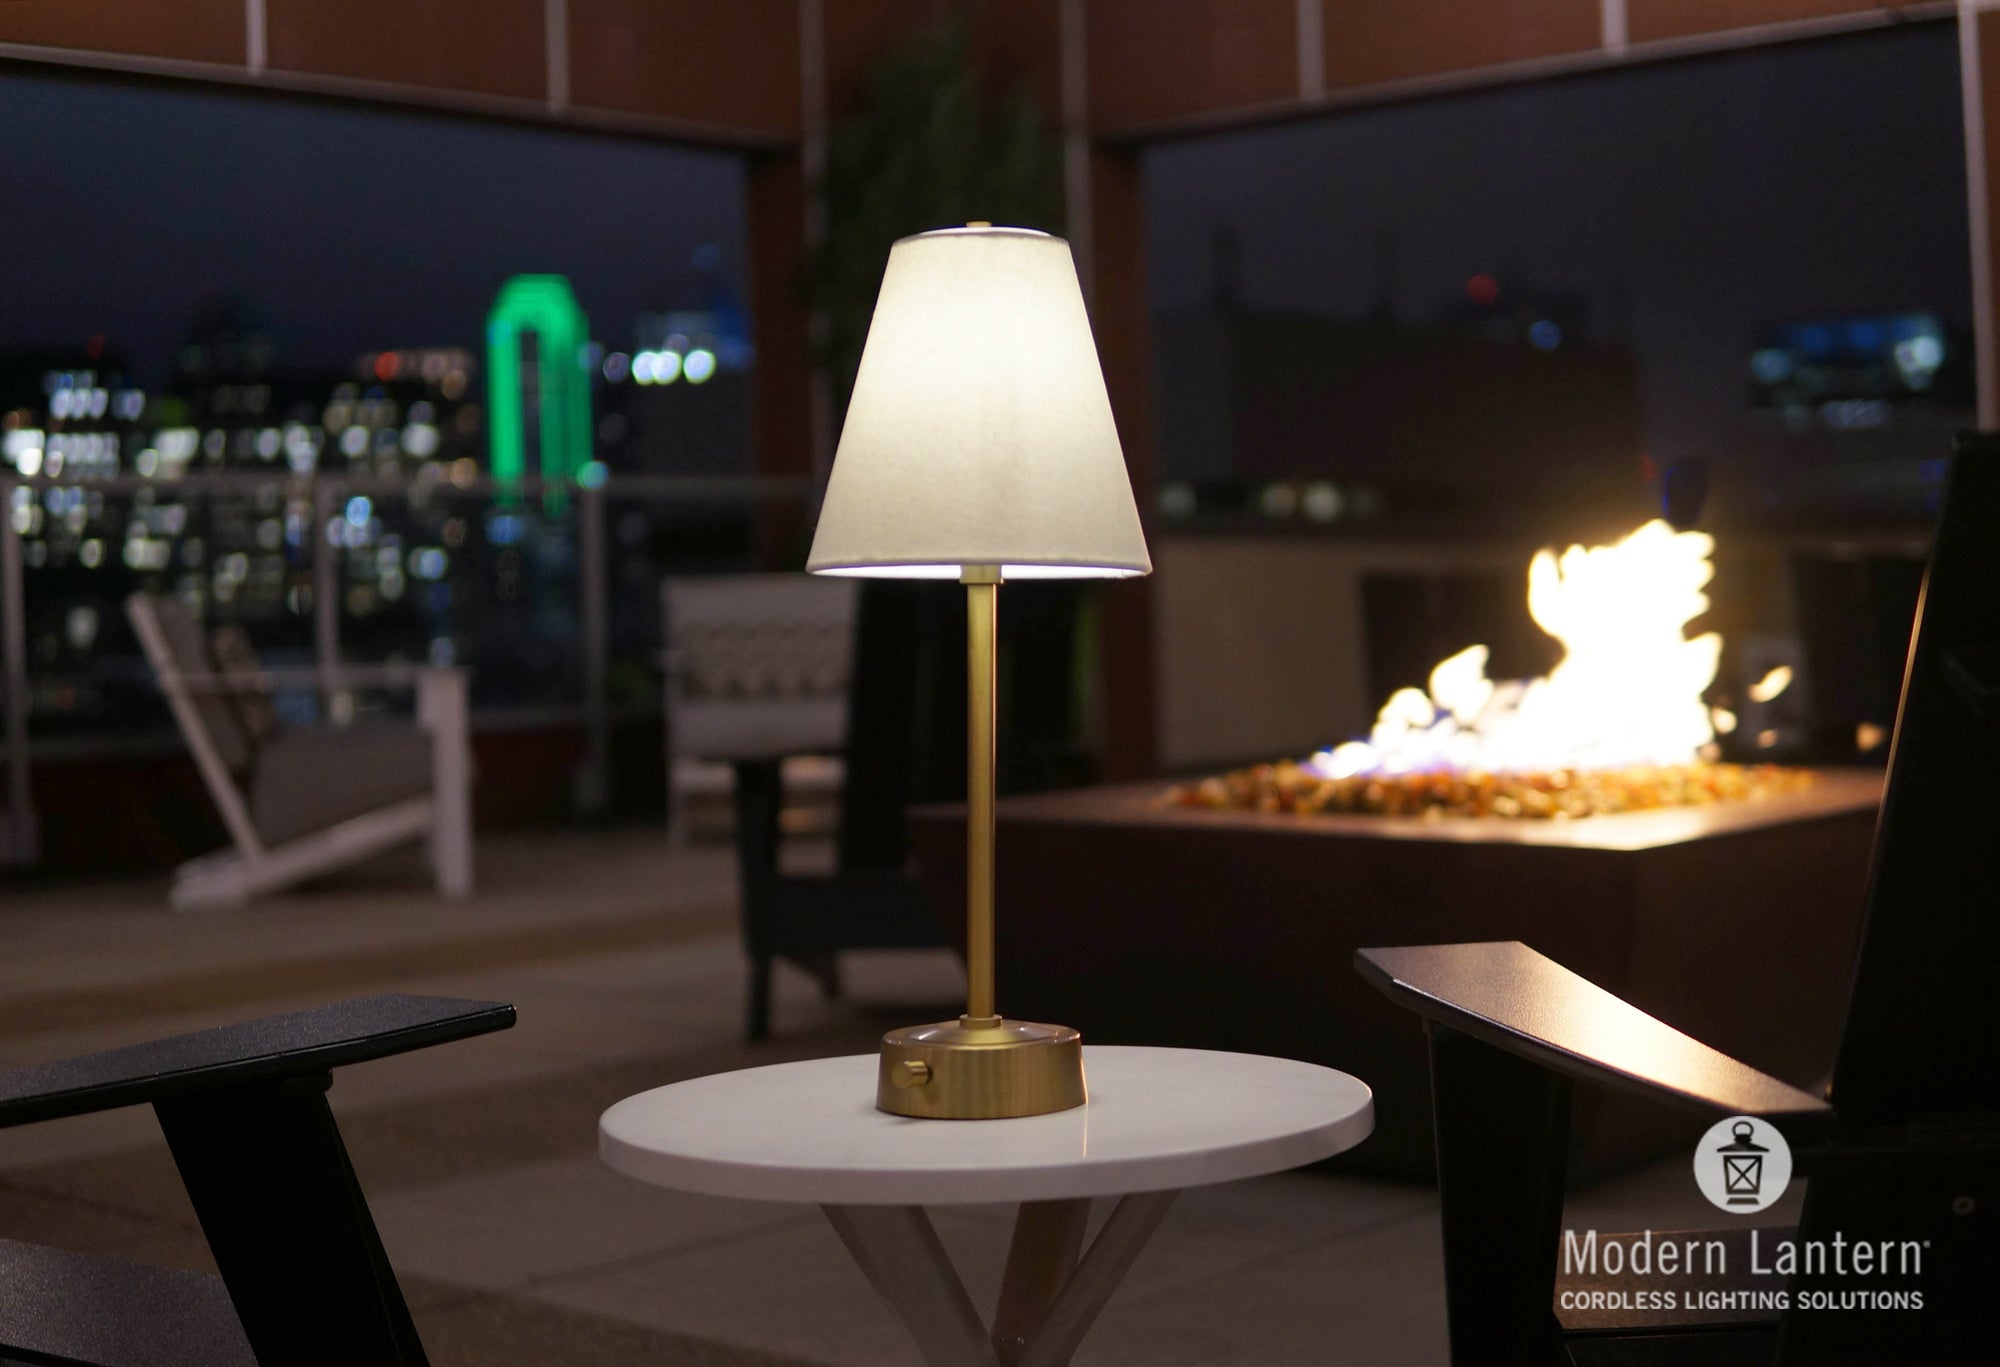 Where to use Modern Lantern Mini Buffet Adjustable Cordless Lamps in your home